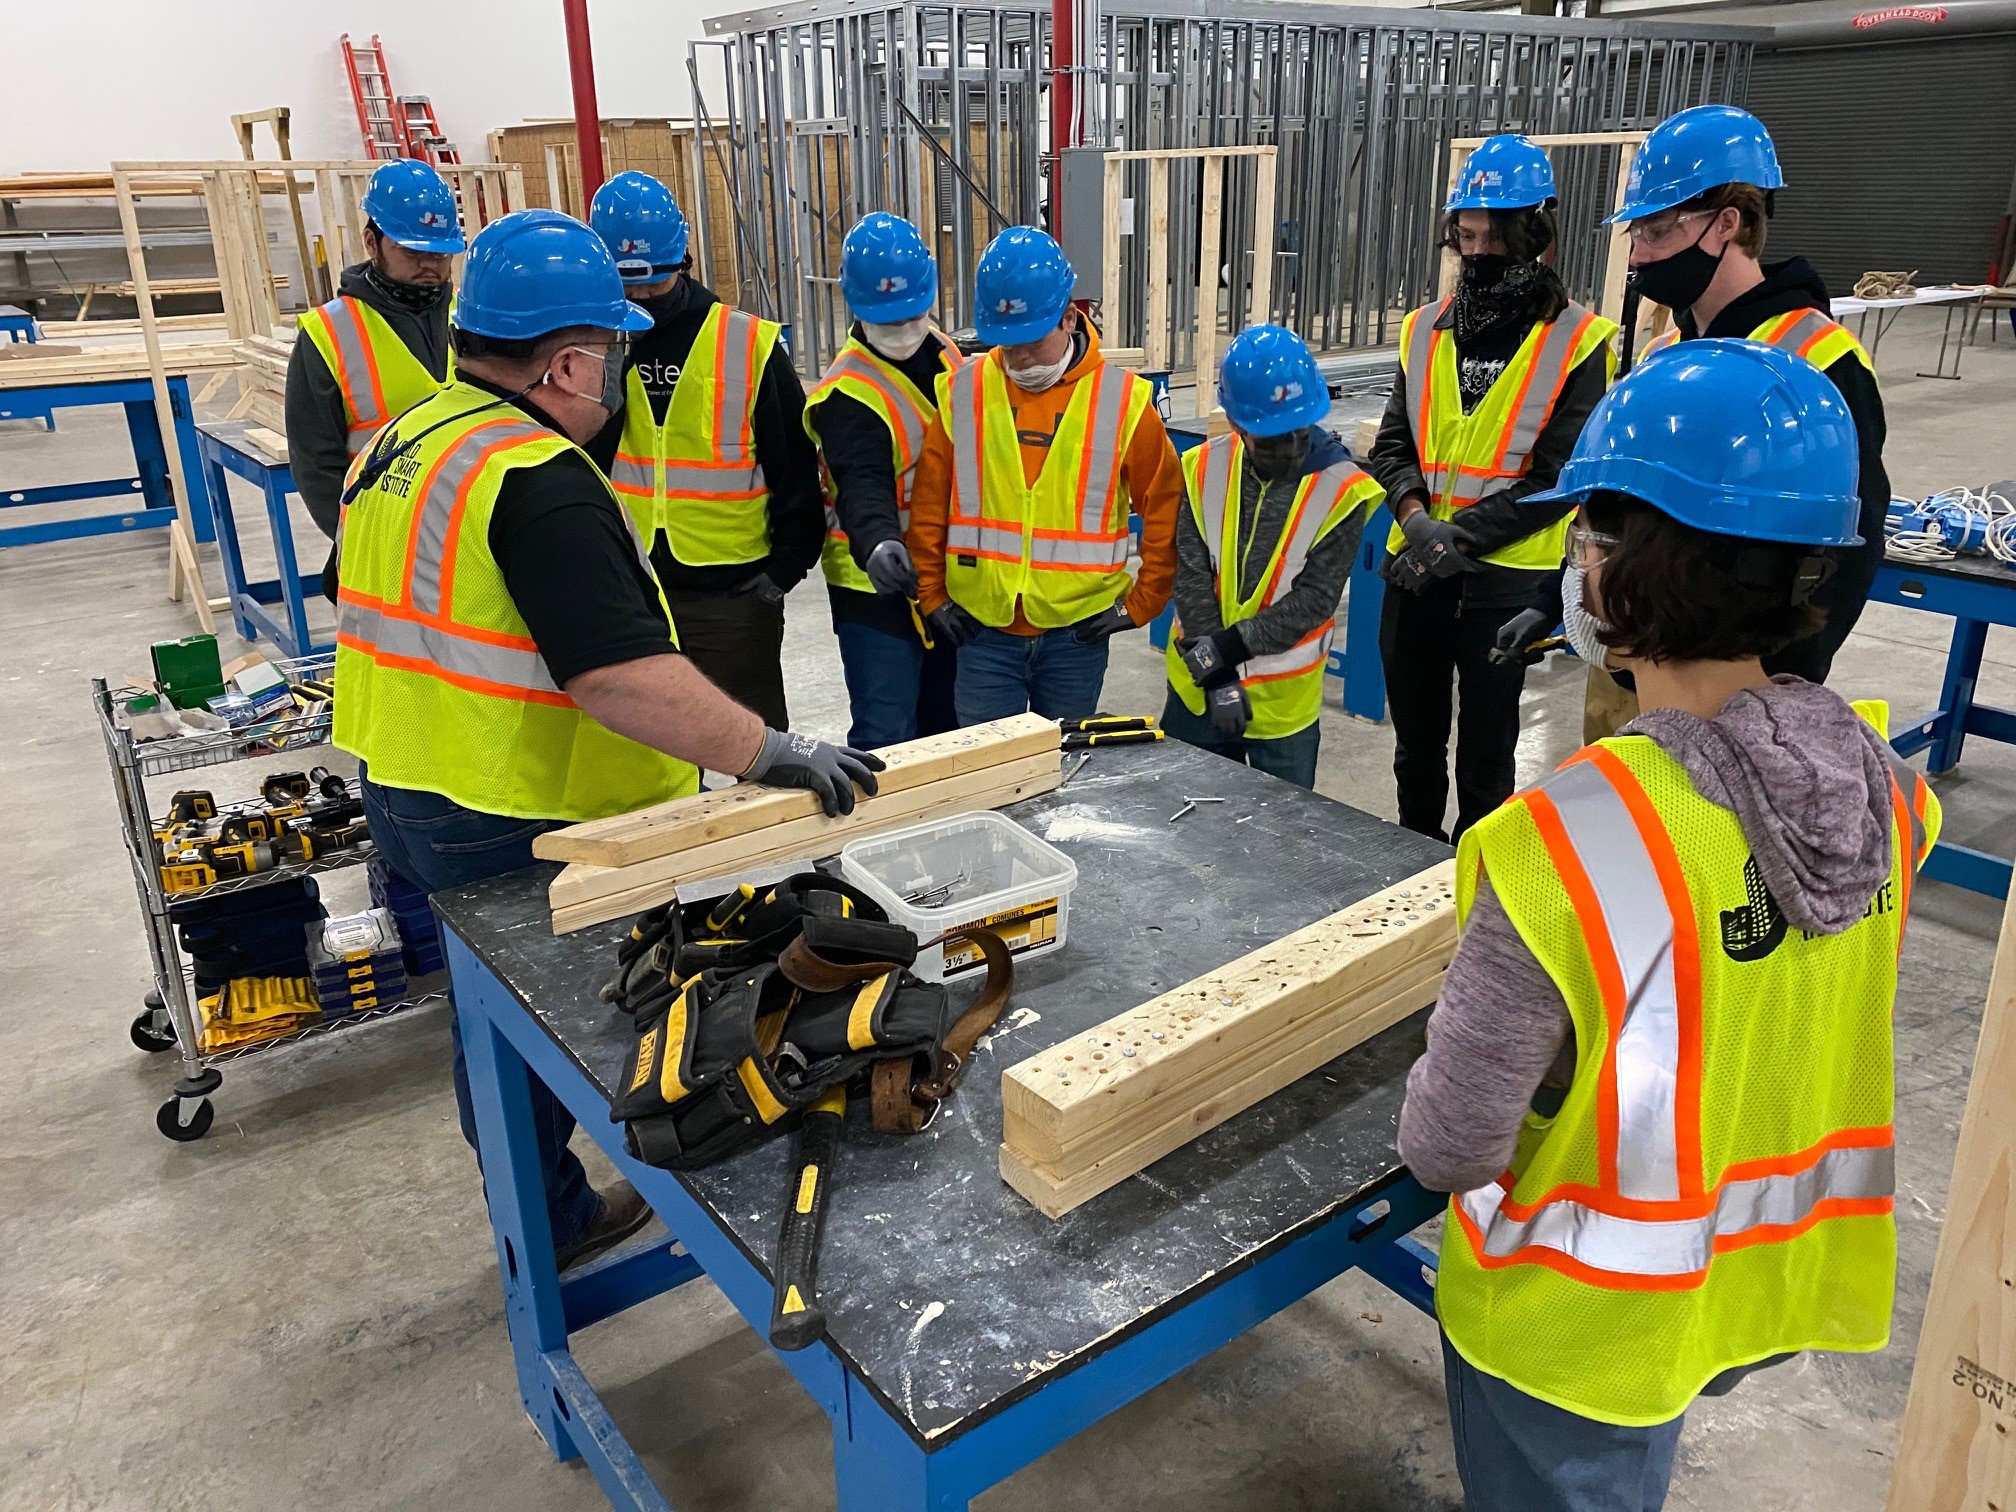 Students gathered around a workbench receiving instructions from an instructor.